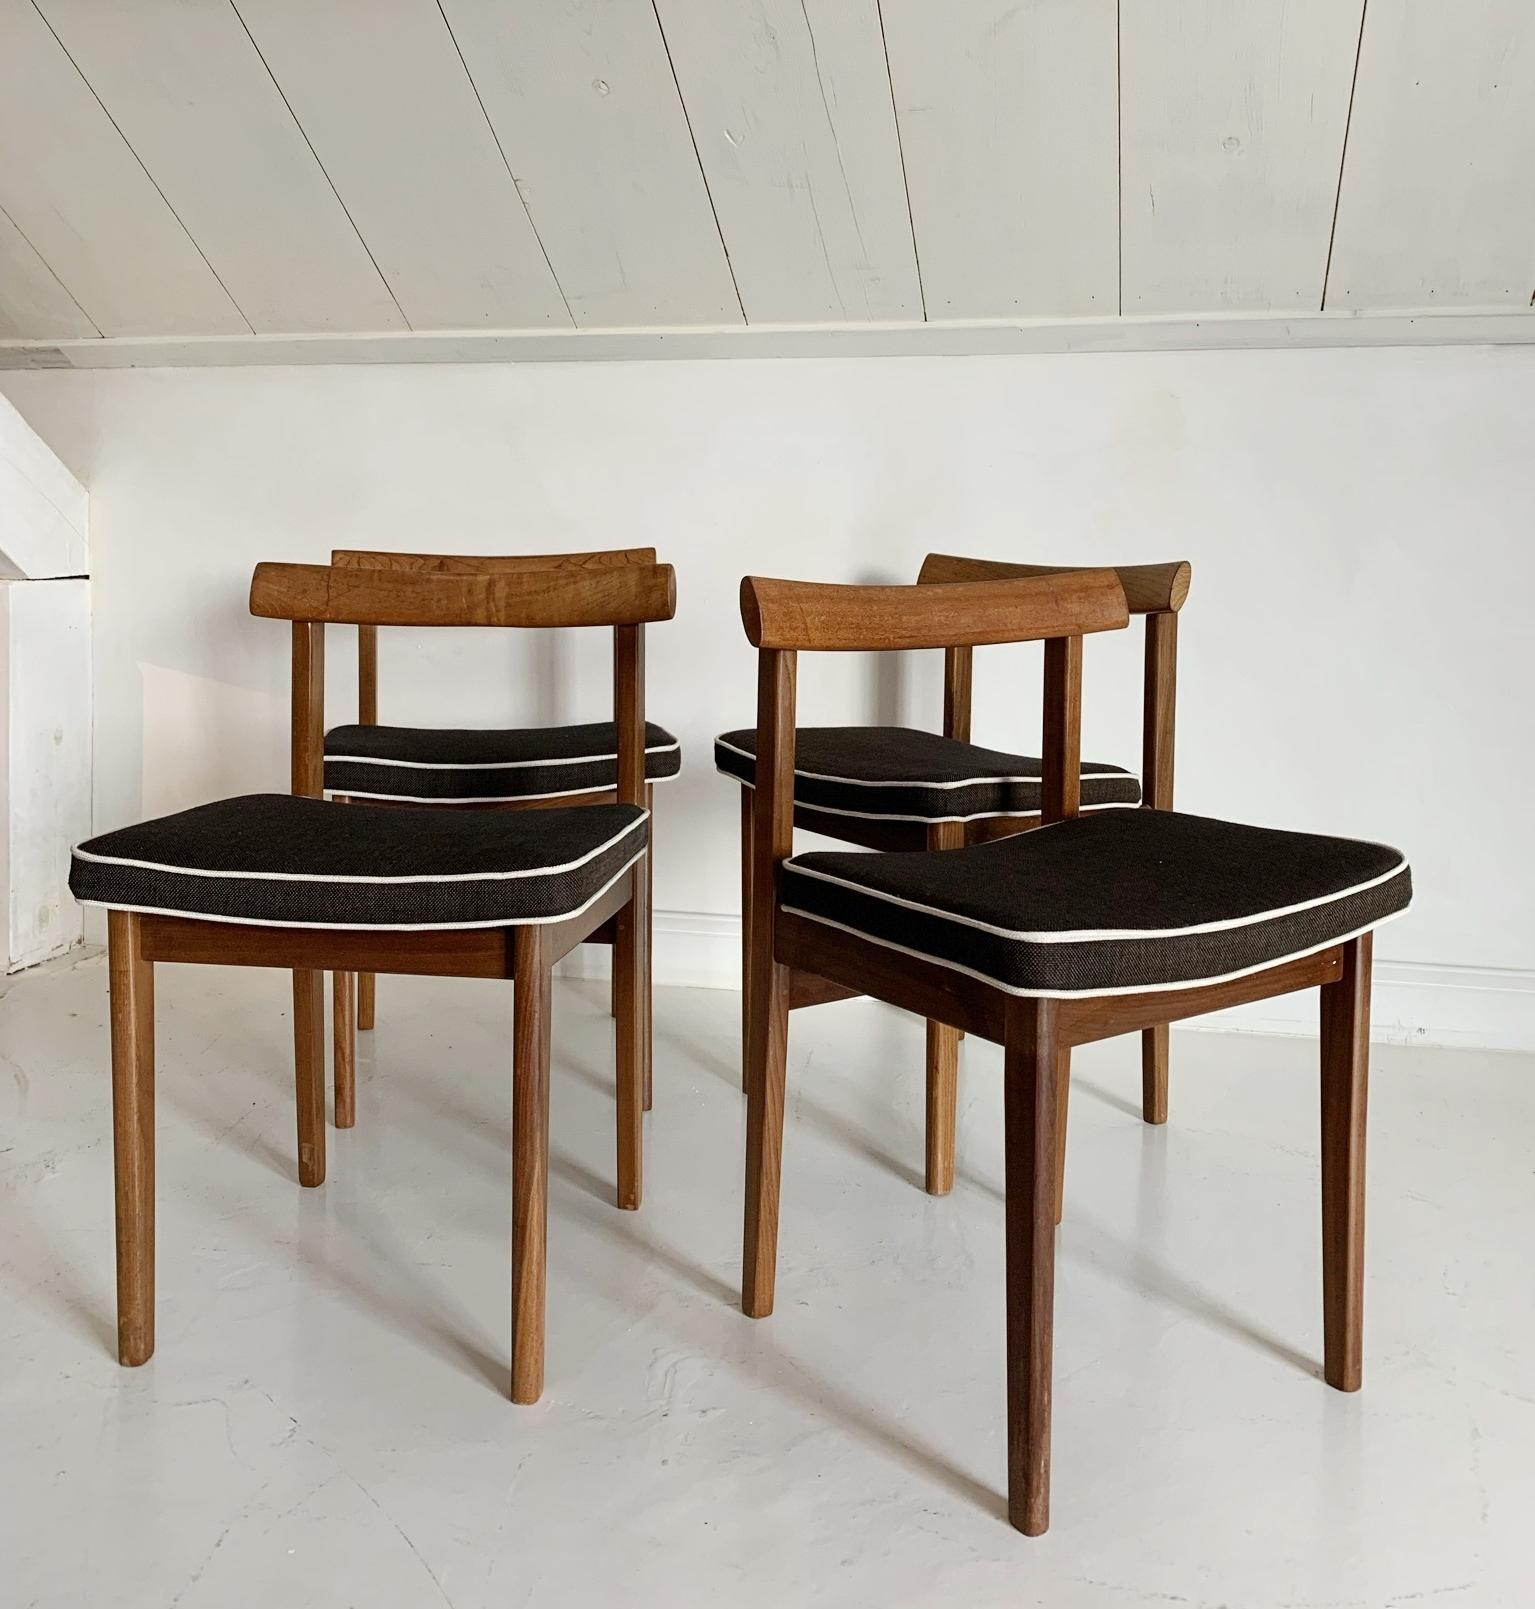 Great set of midcentury chairs. Combining traditional craftmanship and natural materials with a modern design. Beautiful proportions and good practicality.